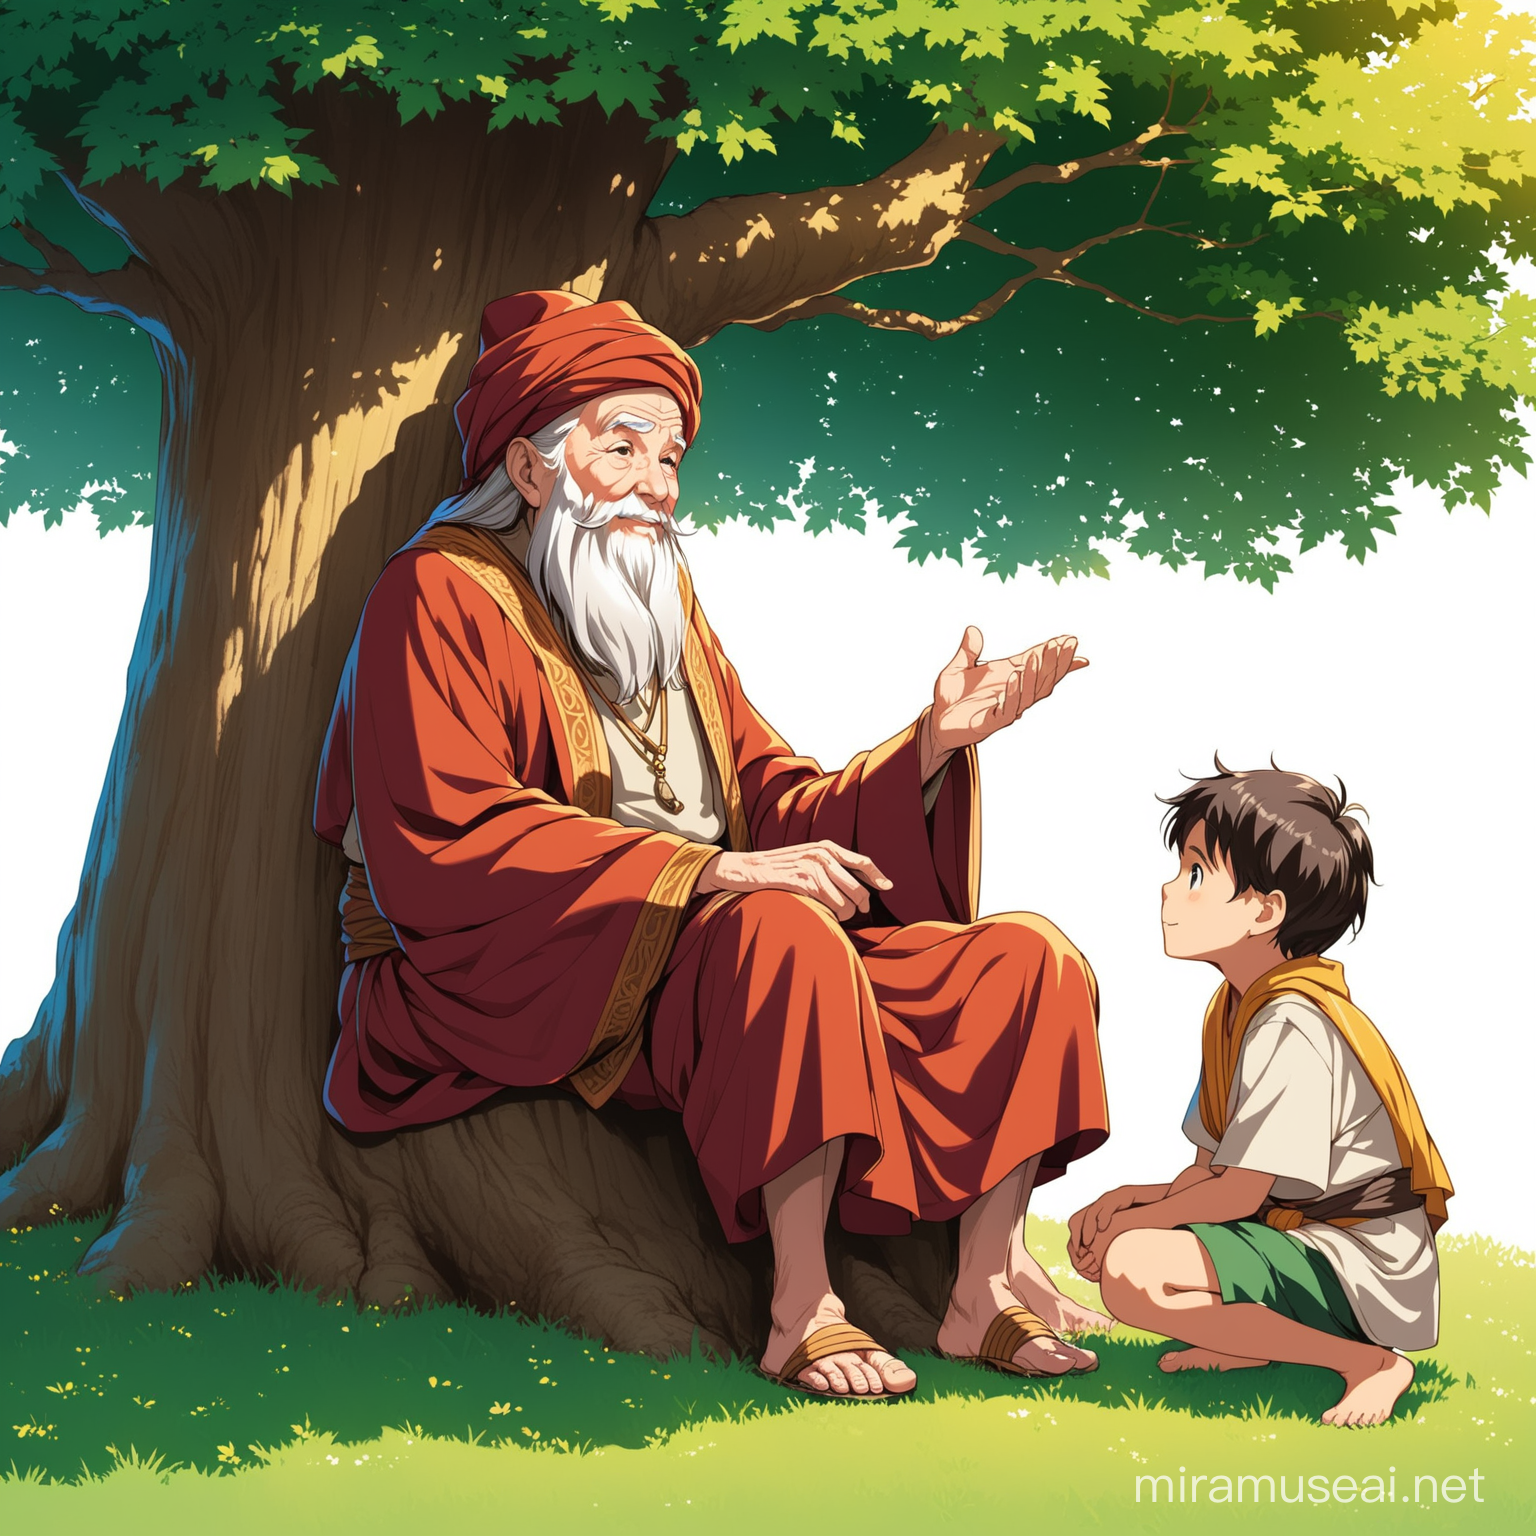 old wise man with boy under tree giving him advise
